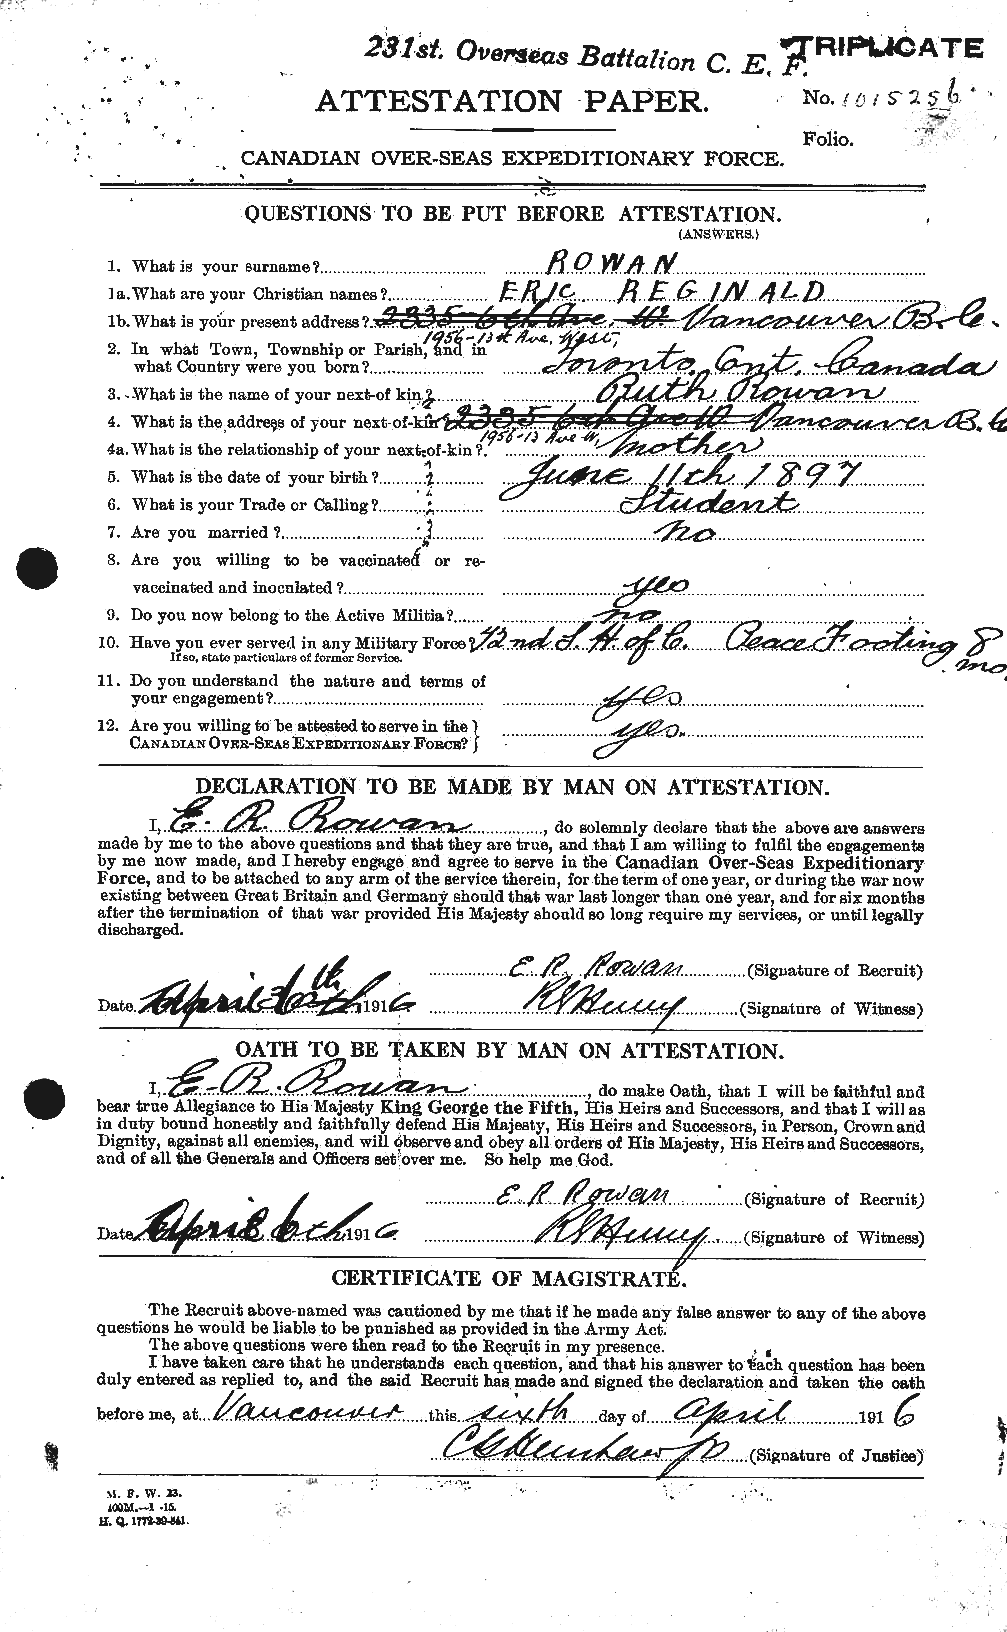 Personnel Records of the First World War - CEF 617968a